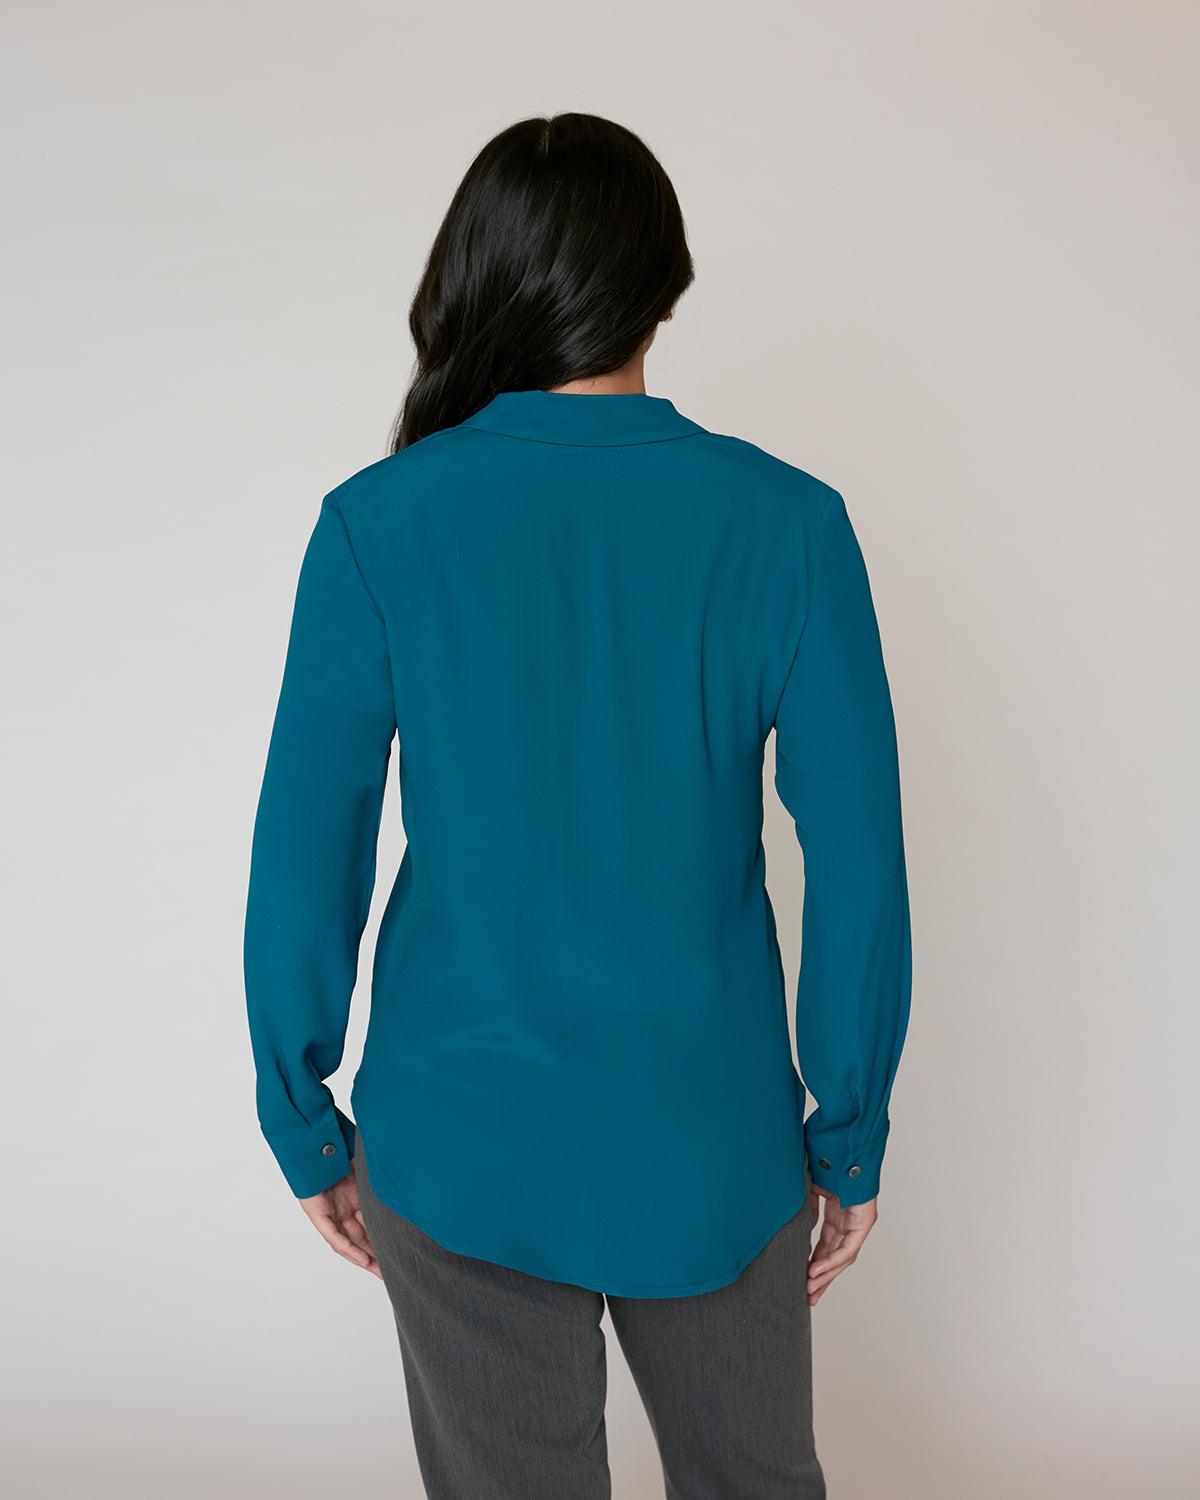 "#color_TOPAZ| Emi is 5'7.5", wearing a size S